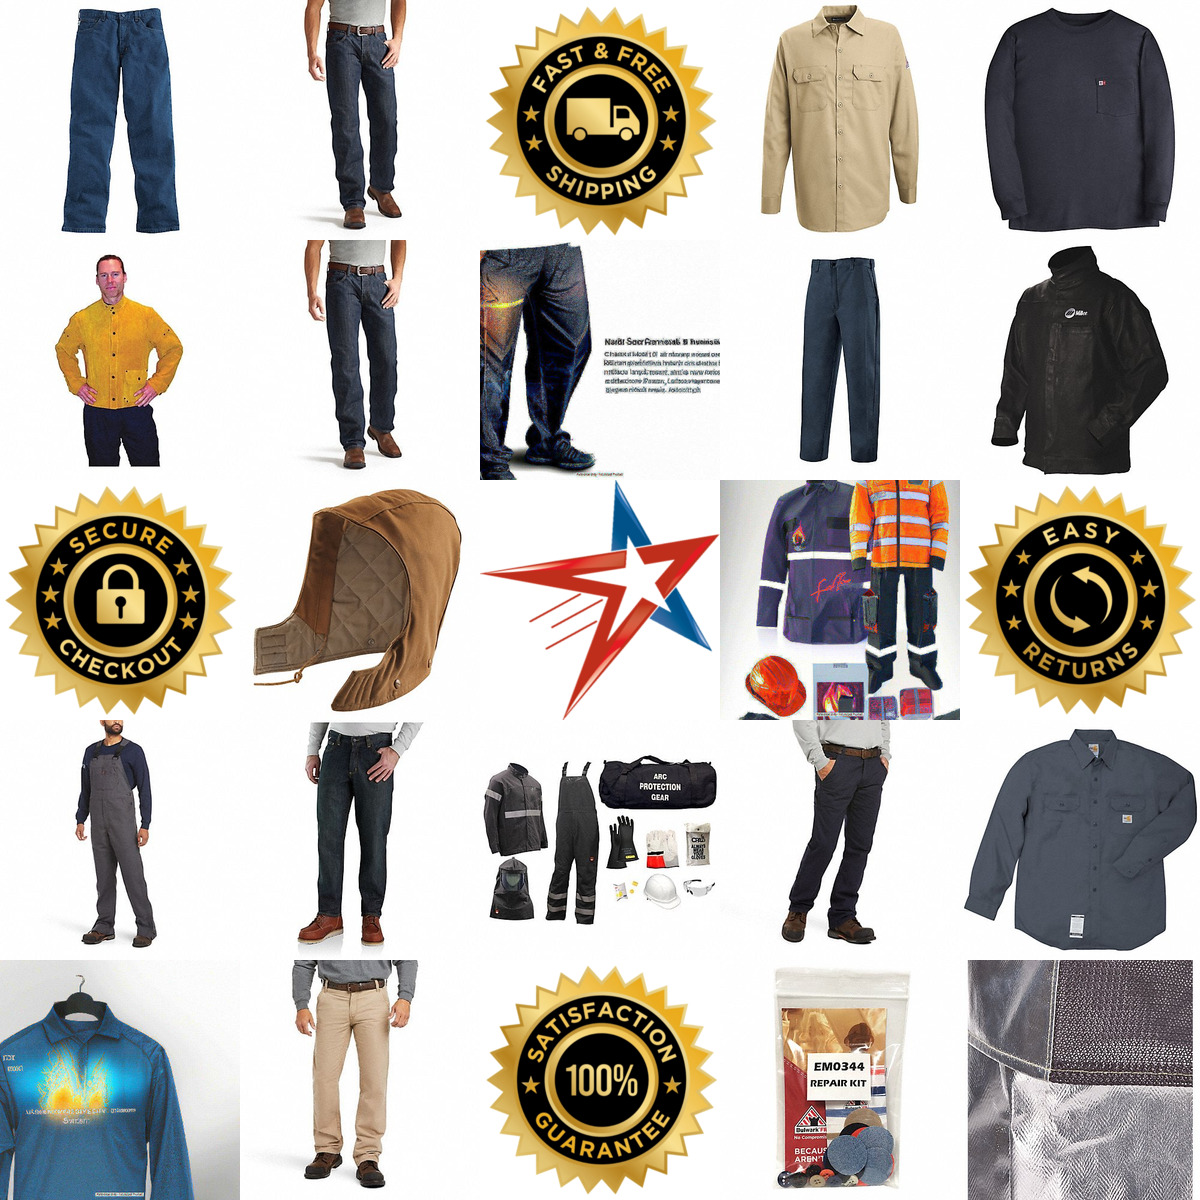 A selection of Flame Resistant and Arc Flash Clothing products on GoVets